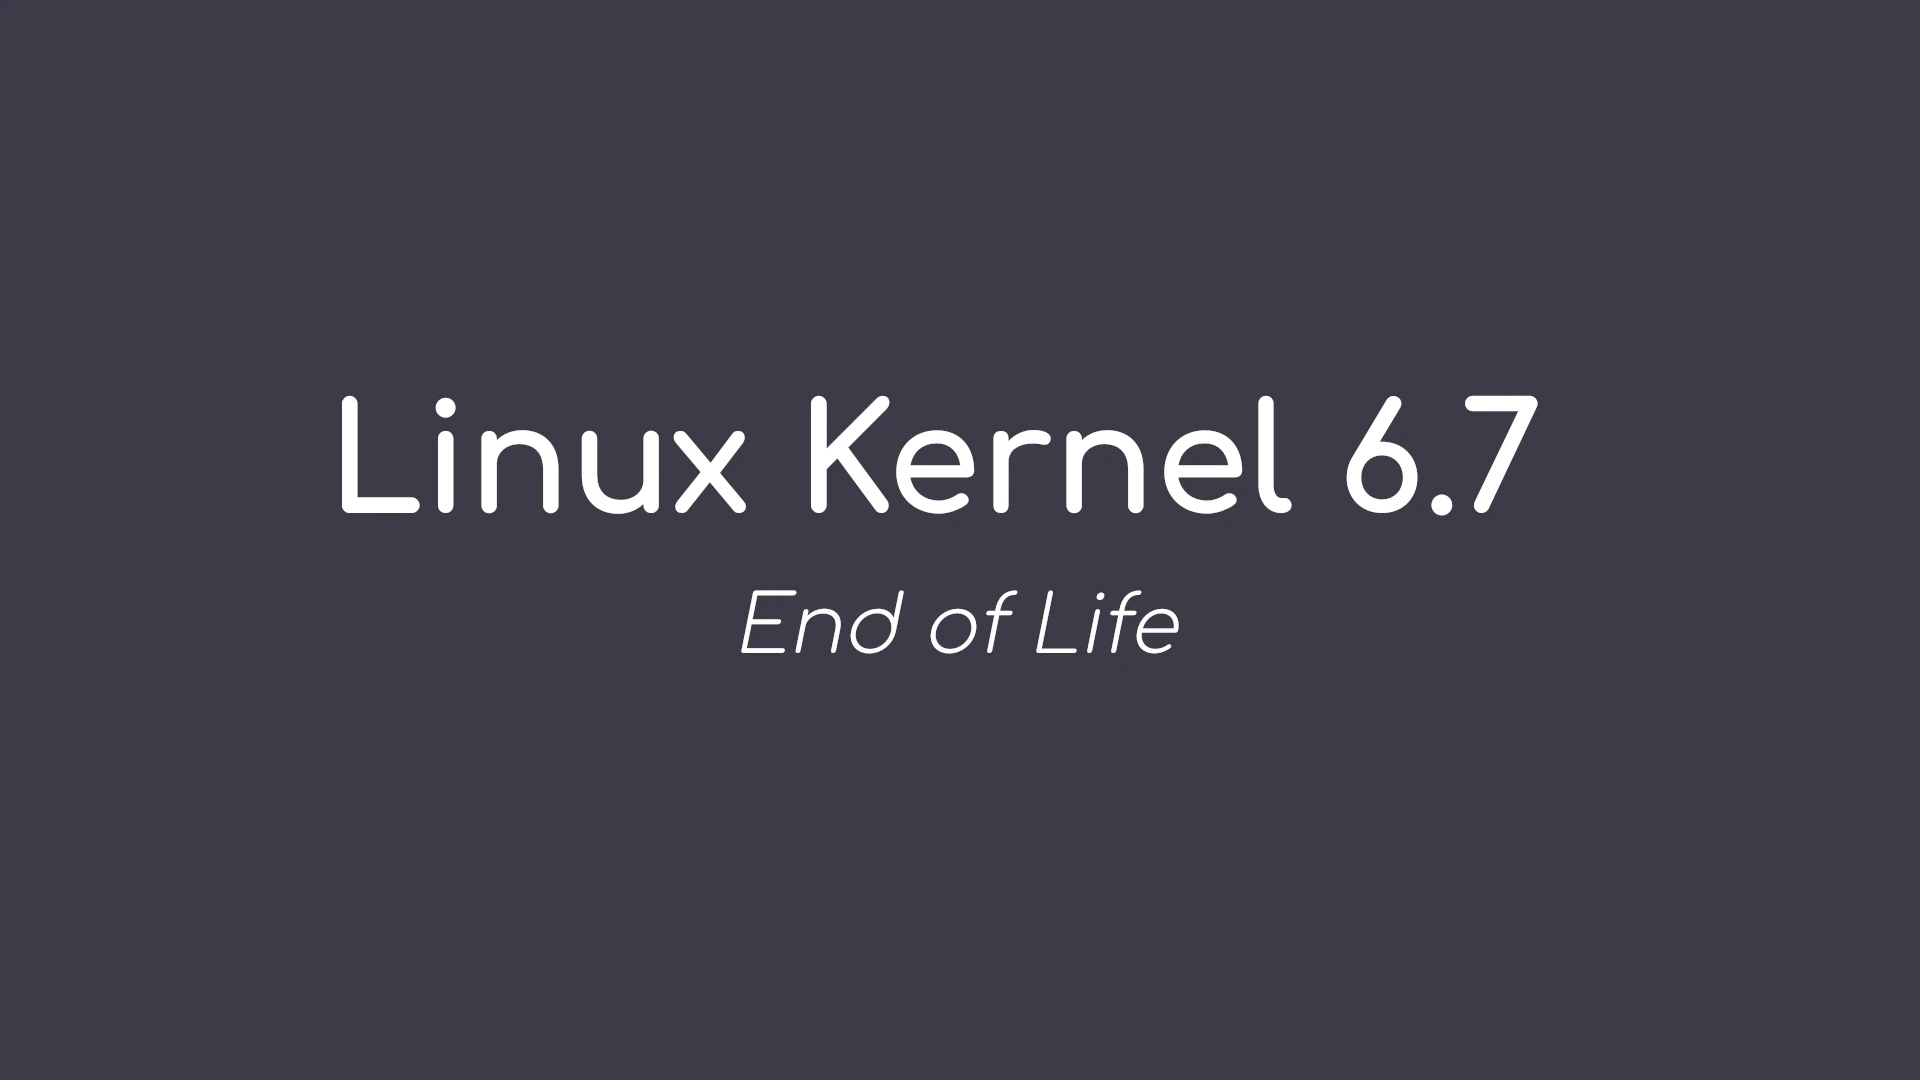 End of Life for Linux Kernel 6.7: Urgent Call for Users to Upgrade to 6.8